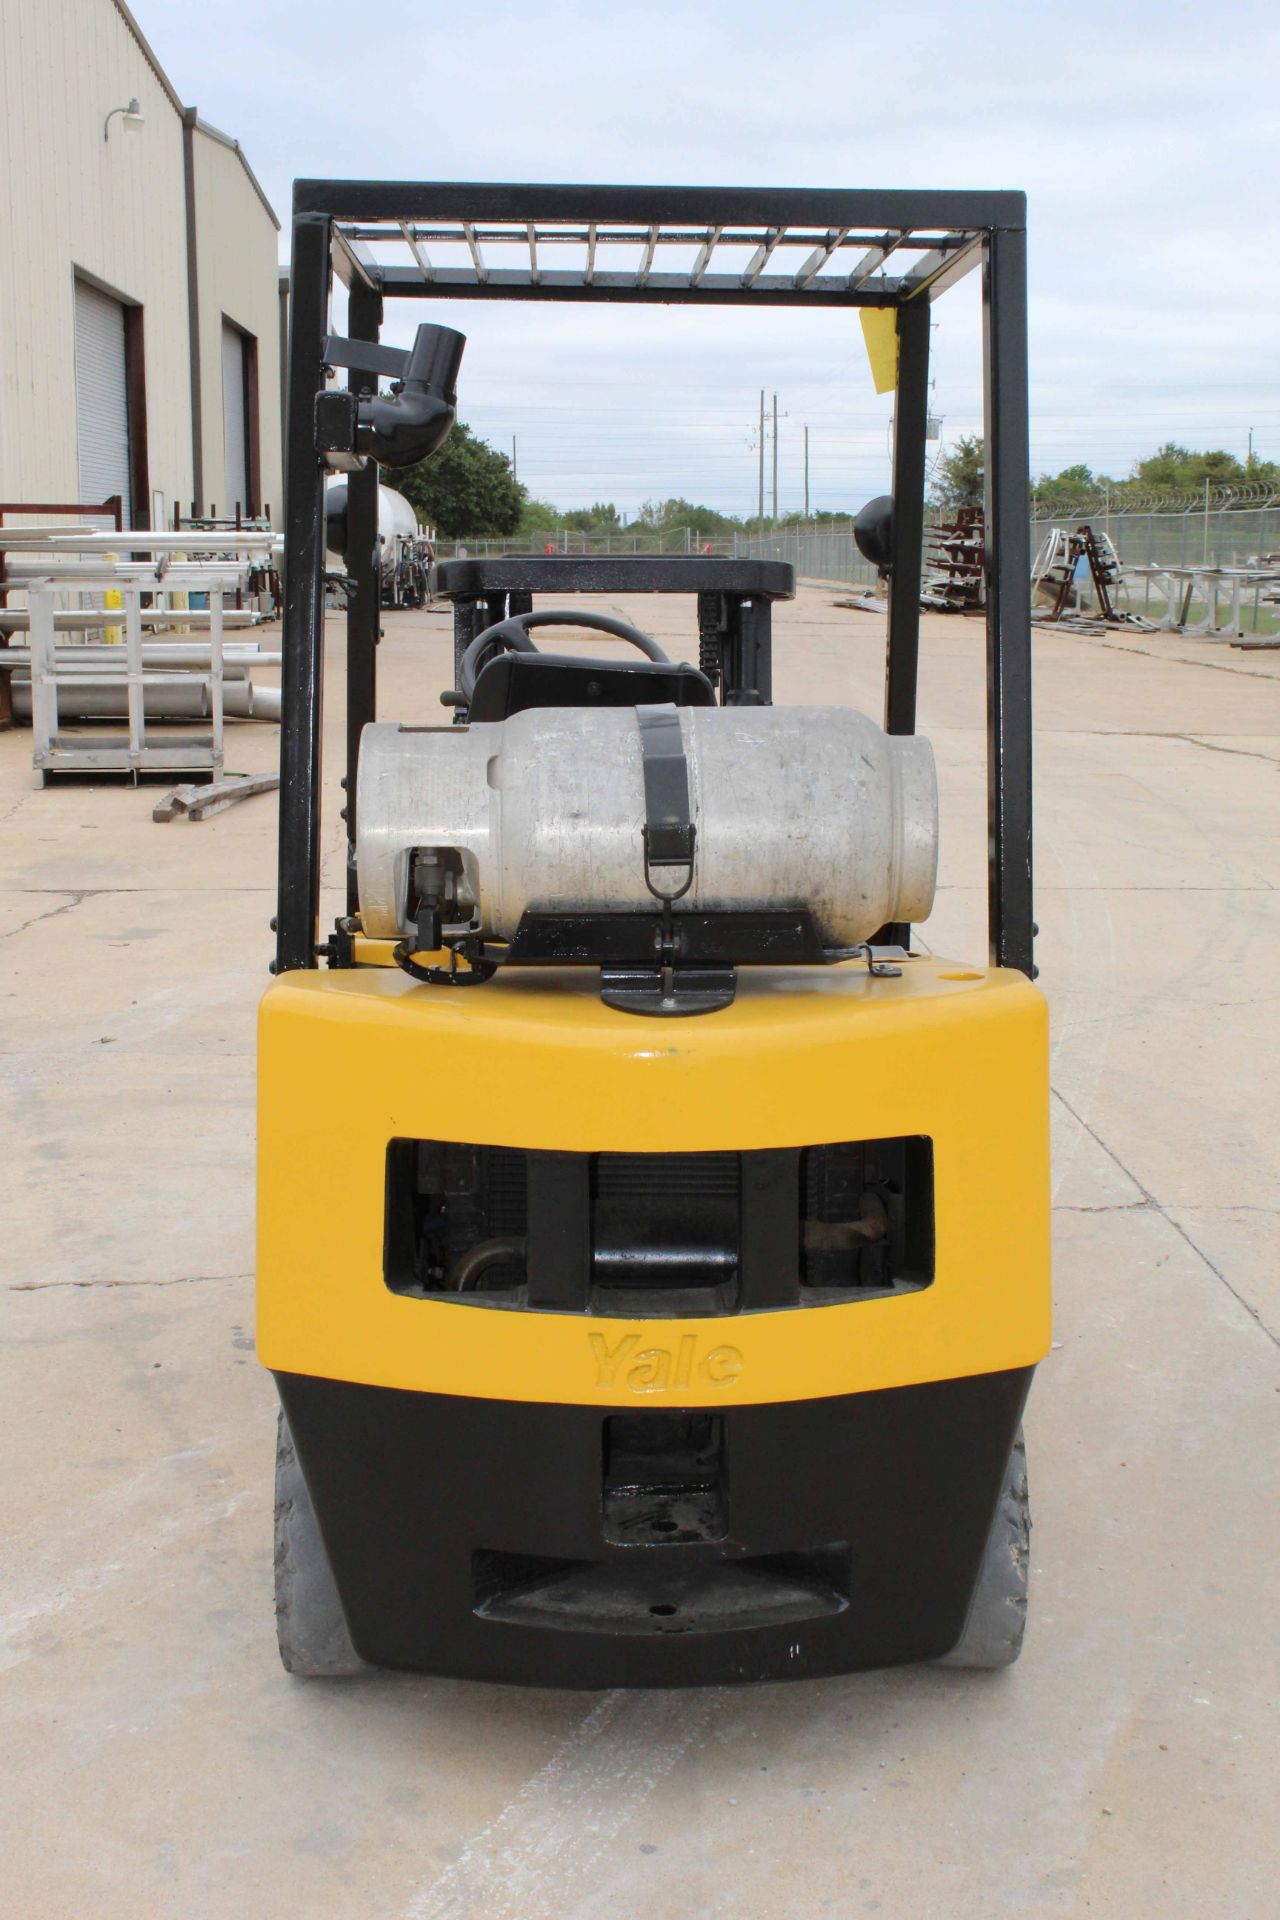 FORKLIFT, YALE 3,000 LB. CAP. MDL. GLP030, new 2000, LPG engine, 83” compact style mast, pneu. style - Image 5 of 10